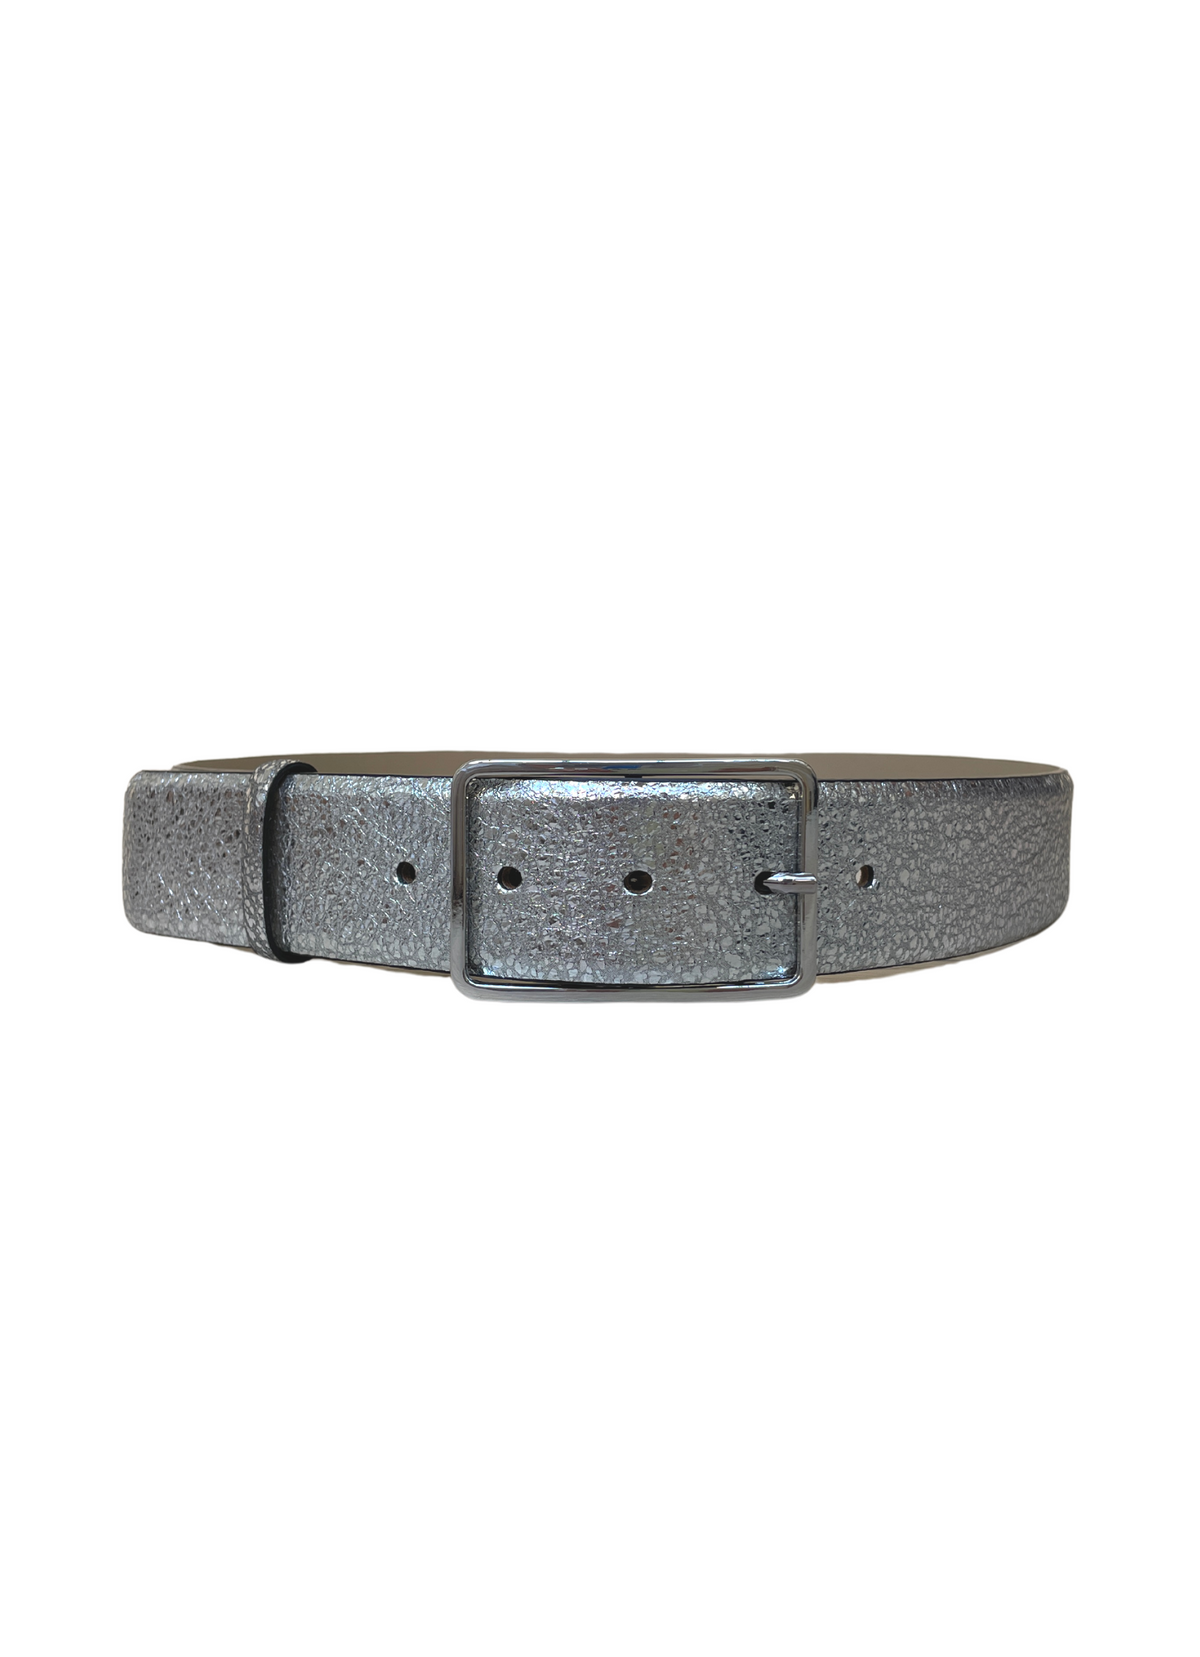 Metallic silver crackle soft leather belt with square silver buckle.